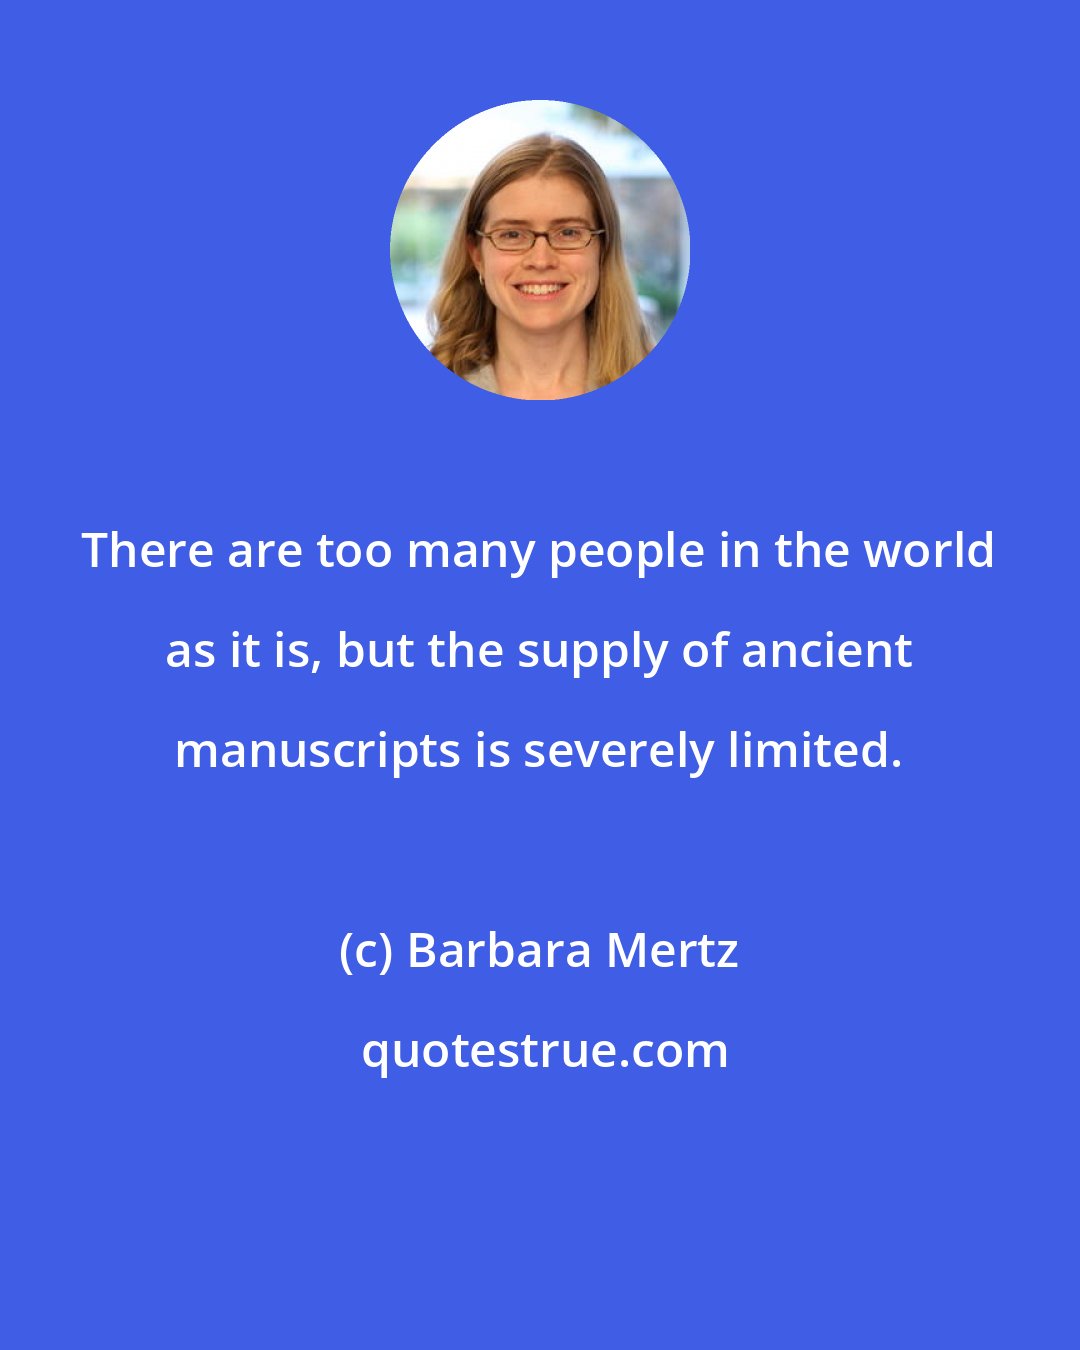 Barbara Mertz: There are too many people in the world as it is, but the supply of ancient manuscripts is severely limited.